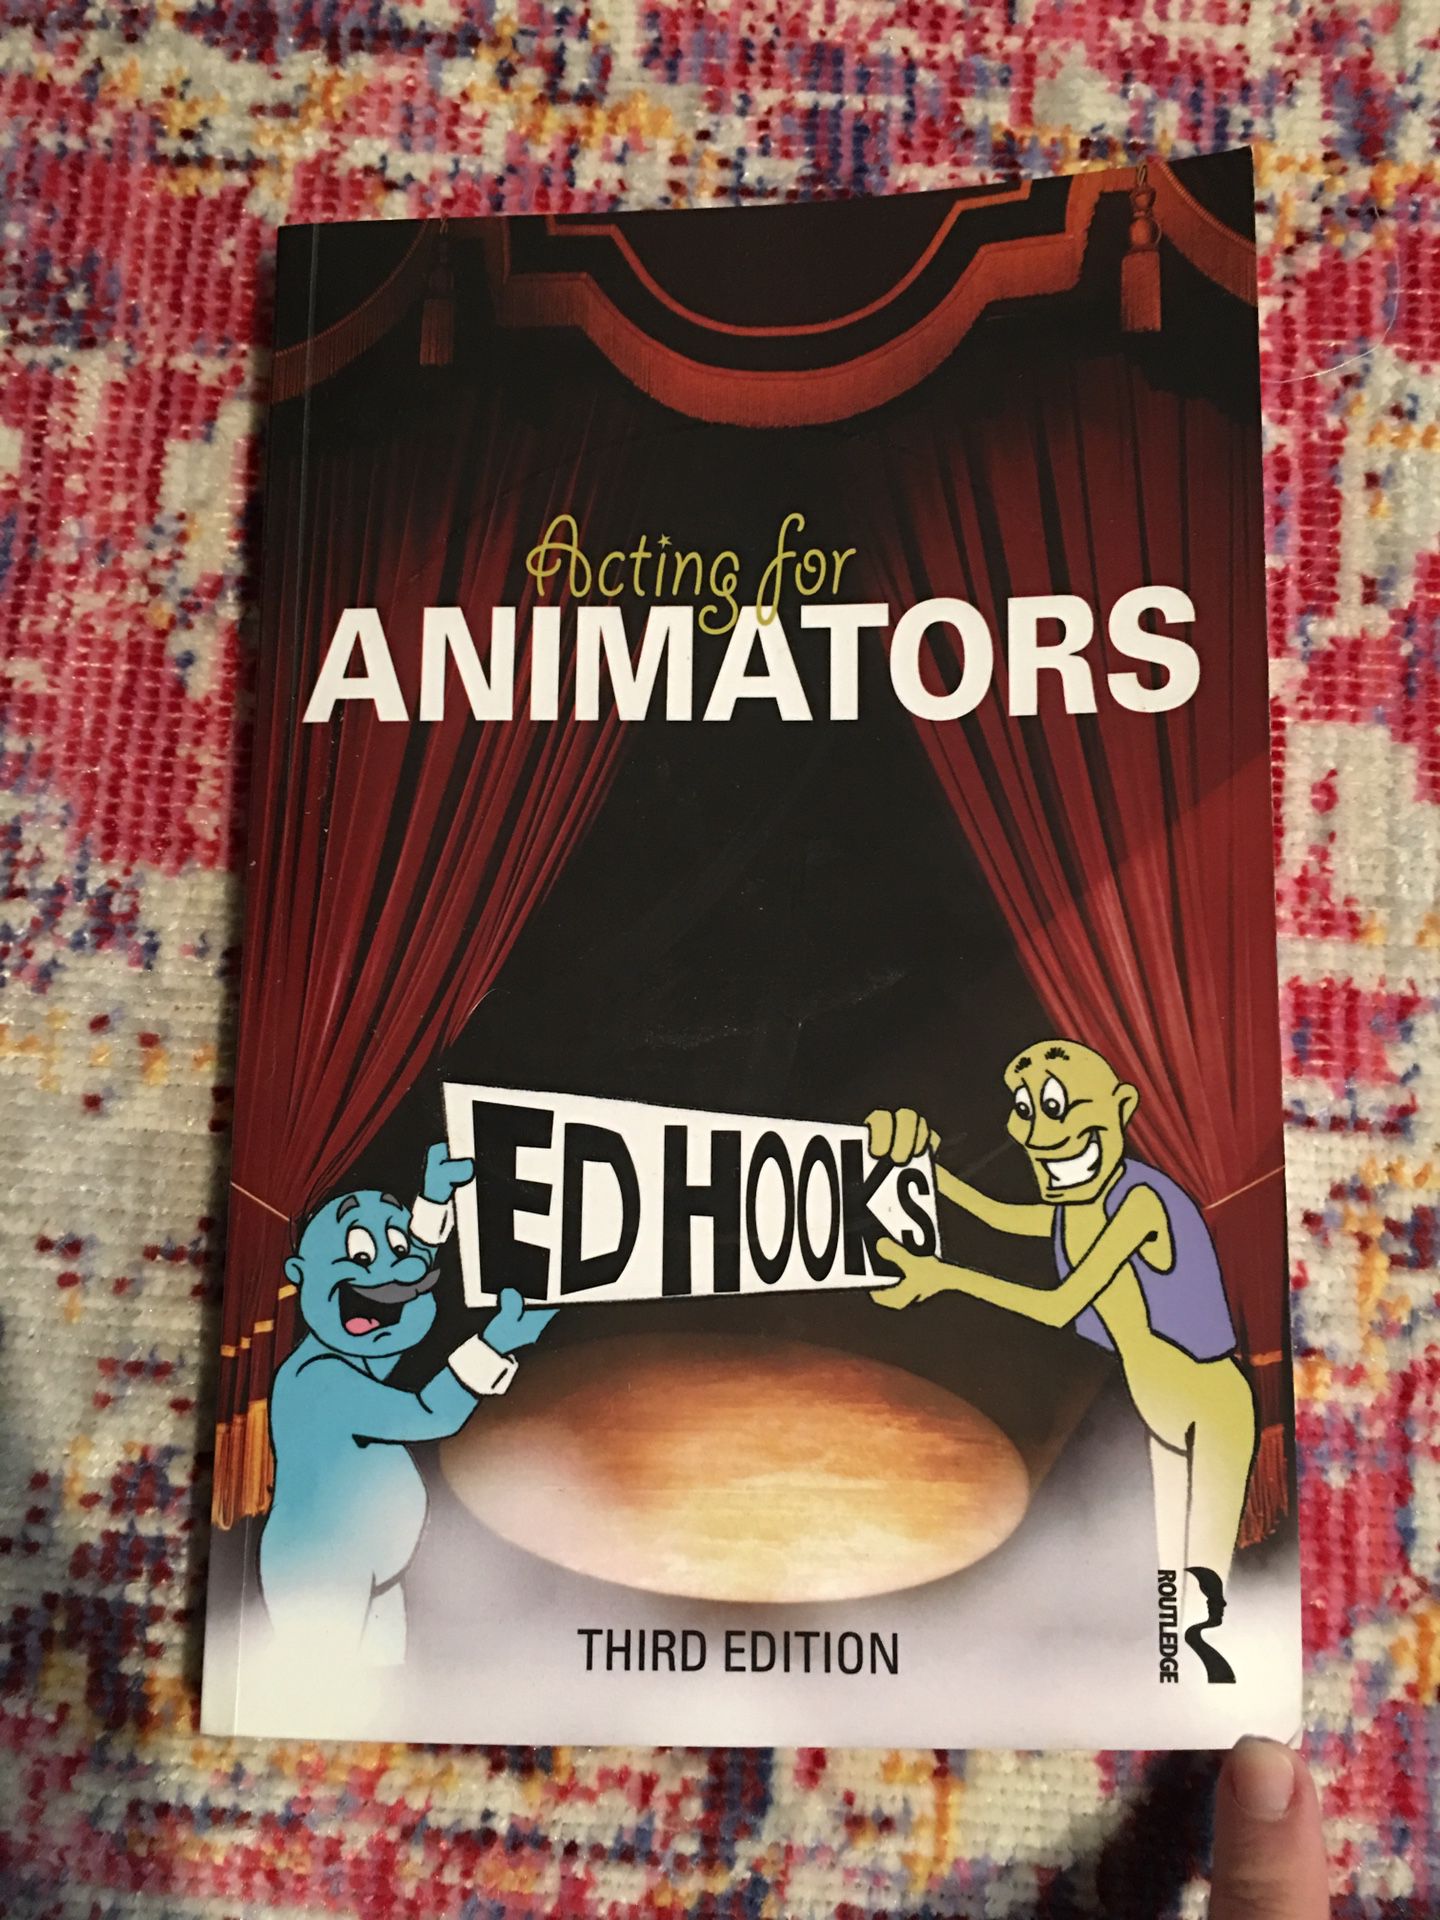 Acting for Animators - Third Edition by Ed Hooks for Sale in Glendale, CA -  OfferUp